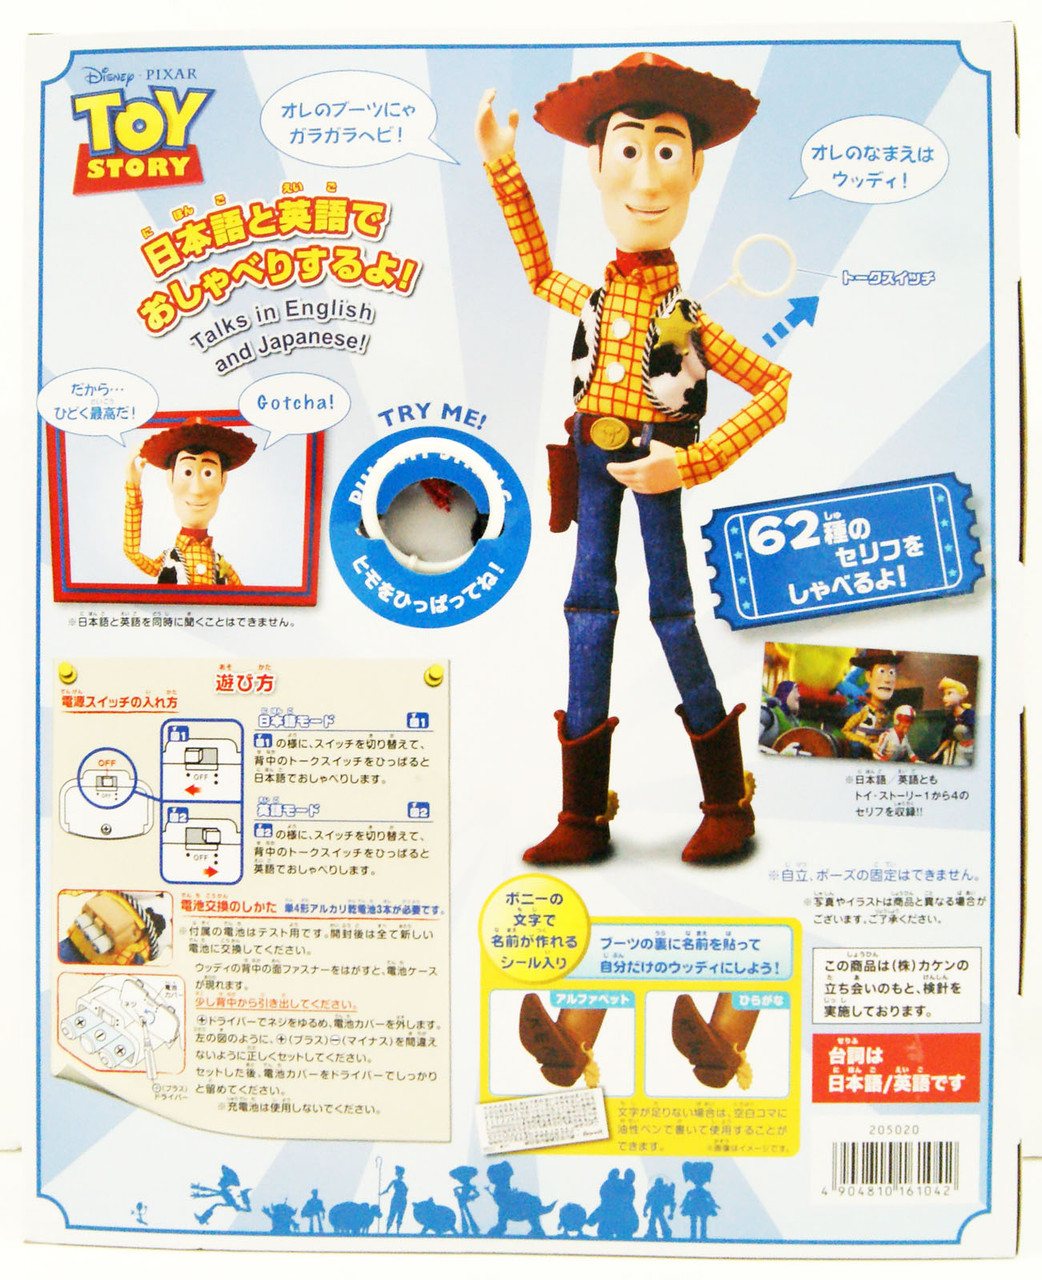 Disney and Pixar Toy Story Movie Toy, Talking Woody Figure with